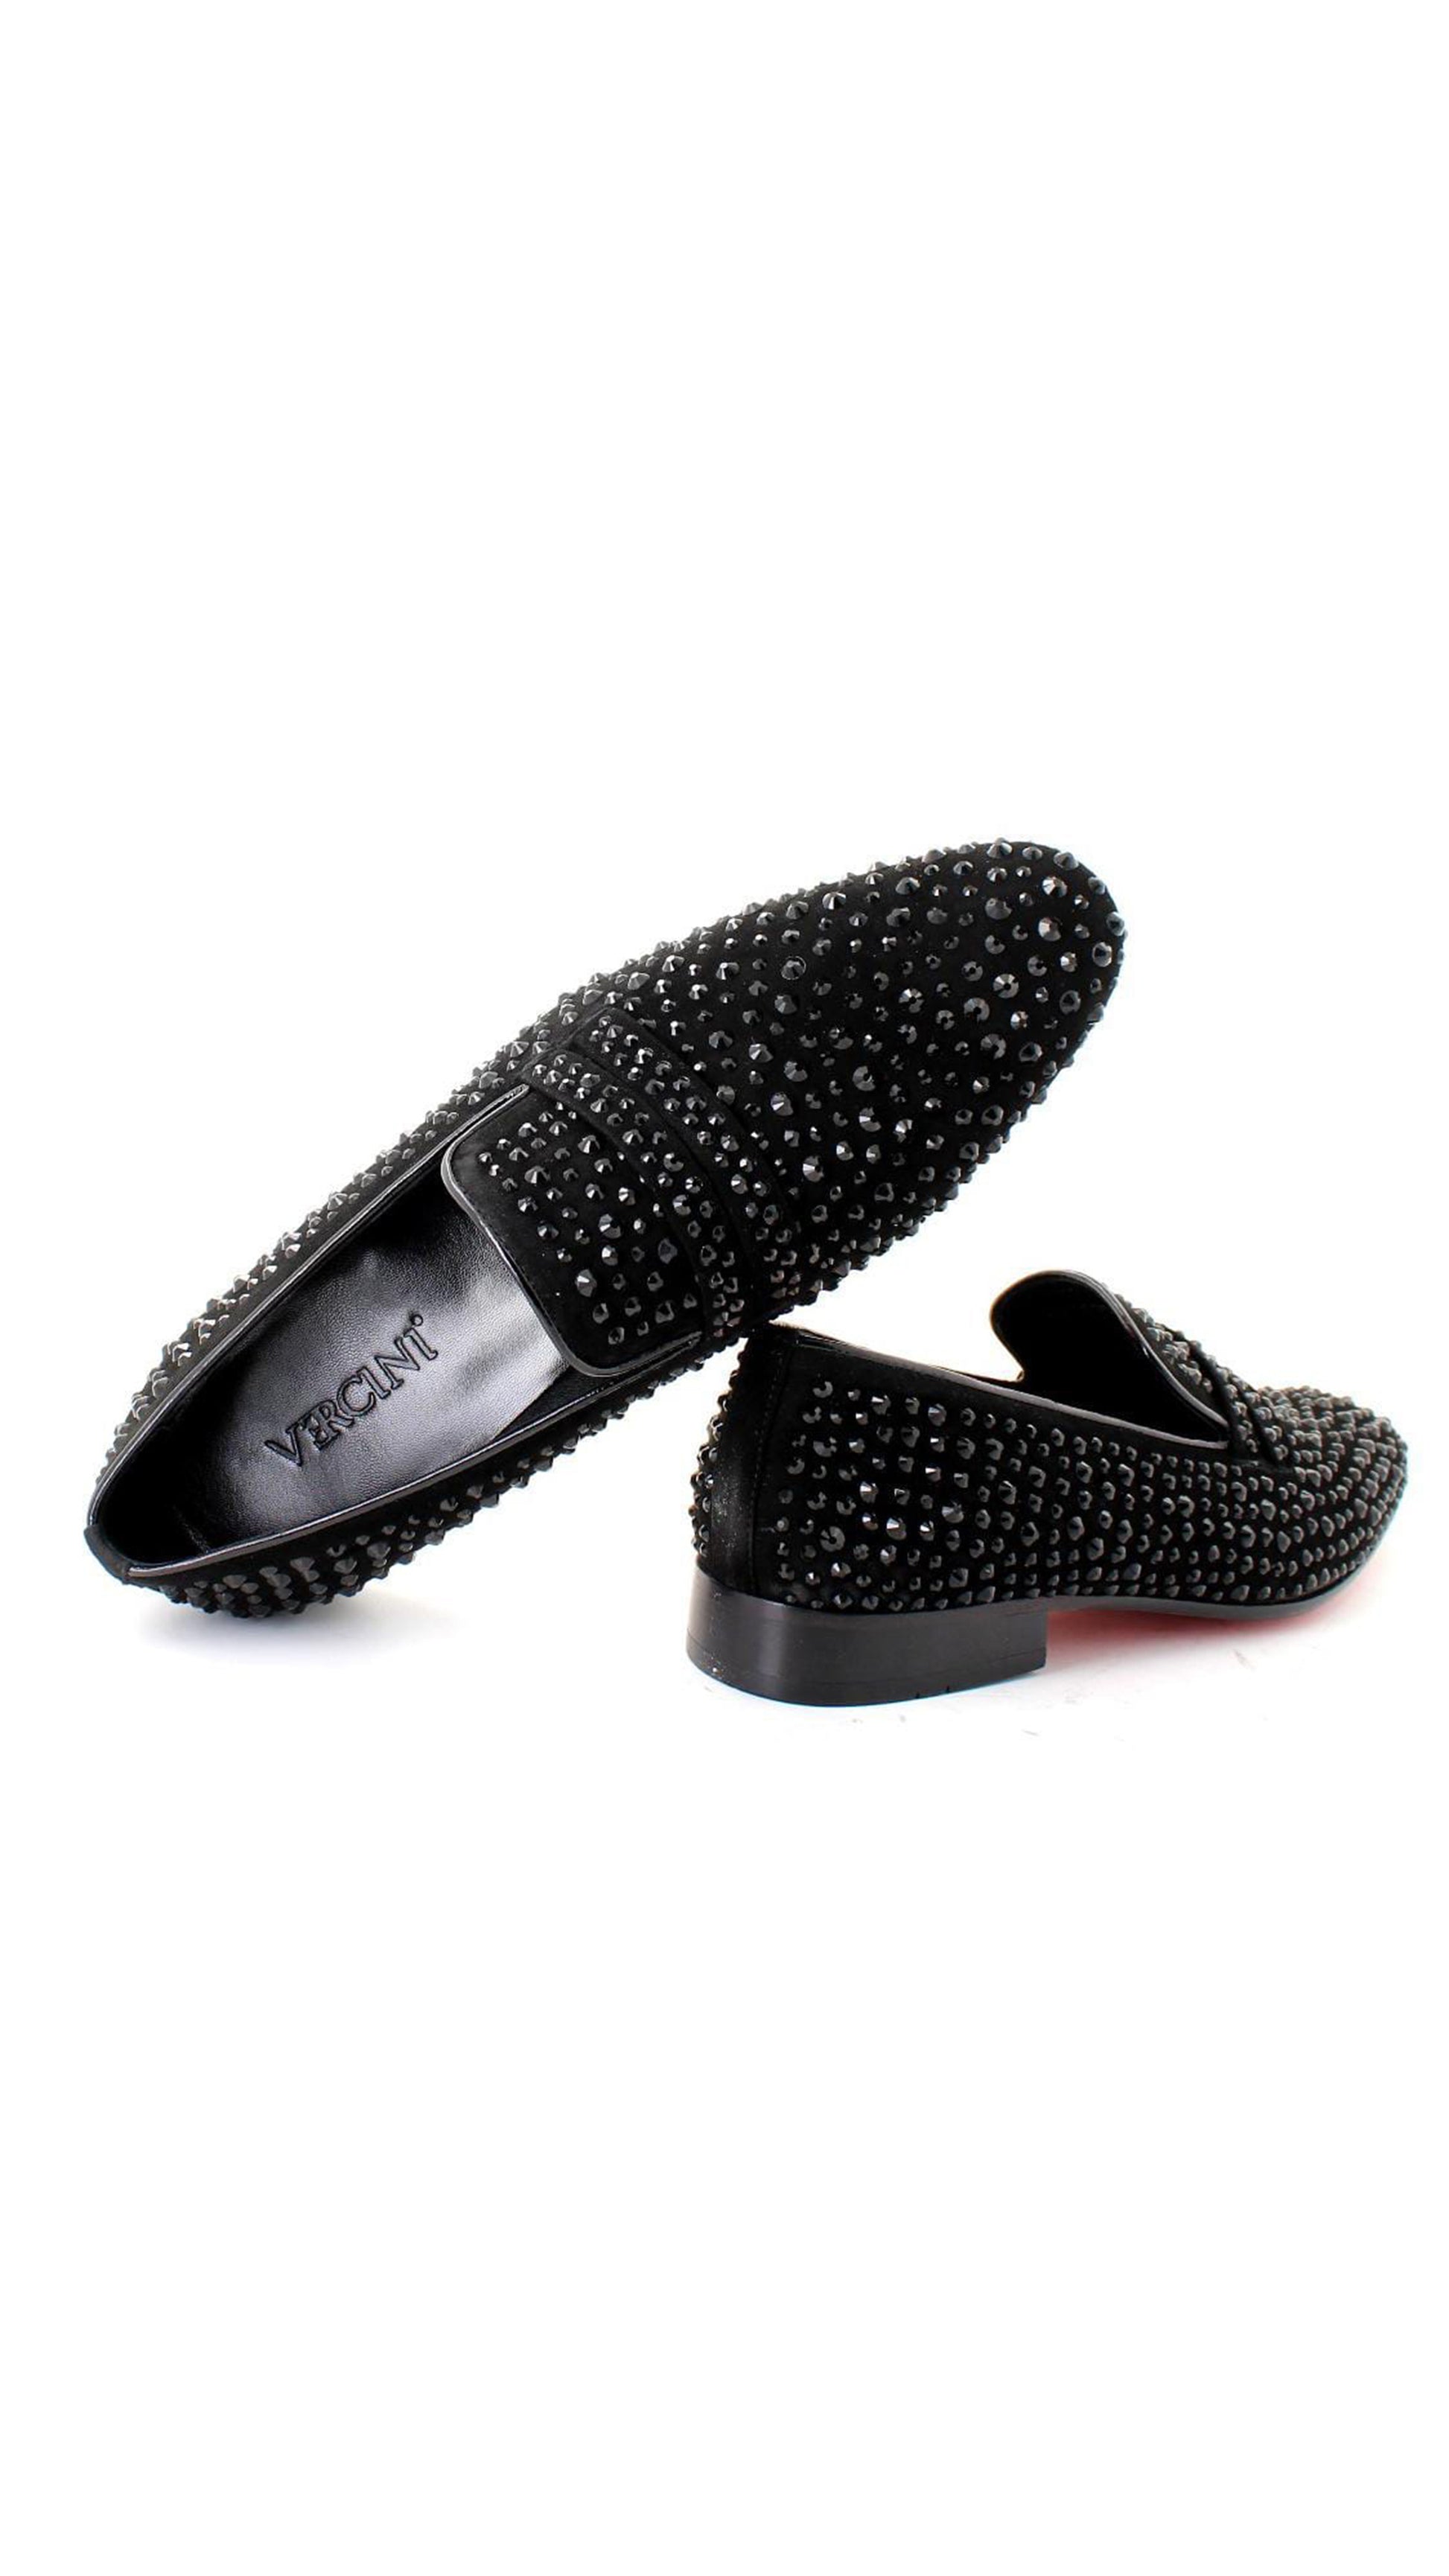 Vercini Luxe Studded Leather Loafers SHOES Shoe Collection Vercini